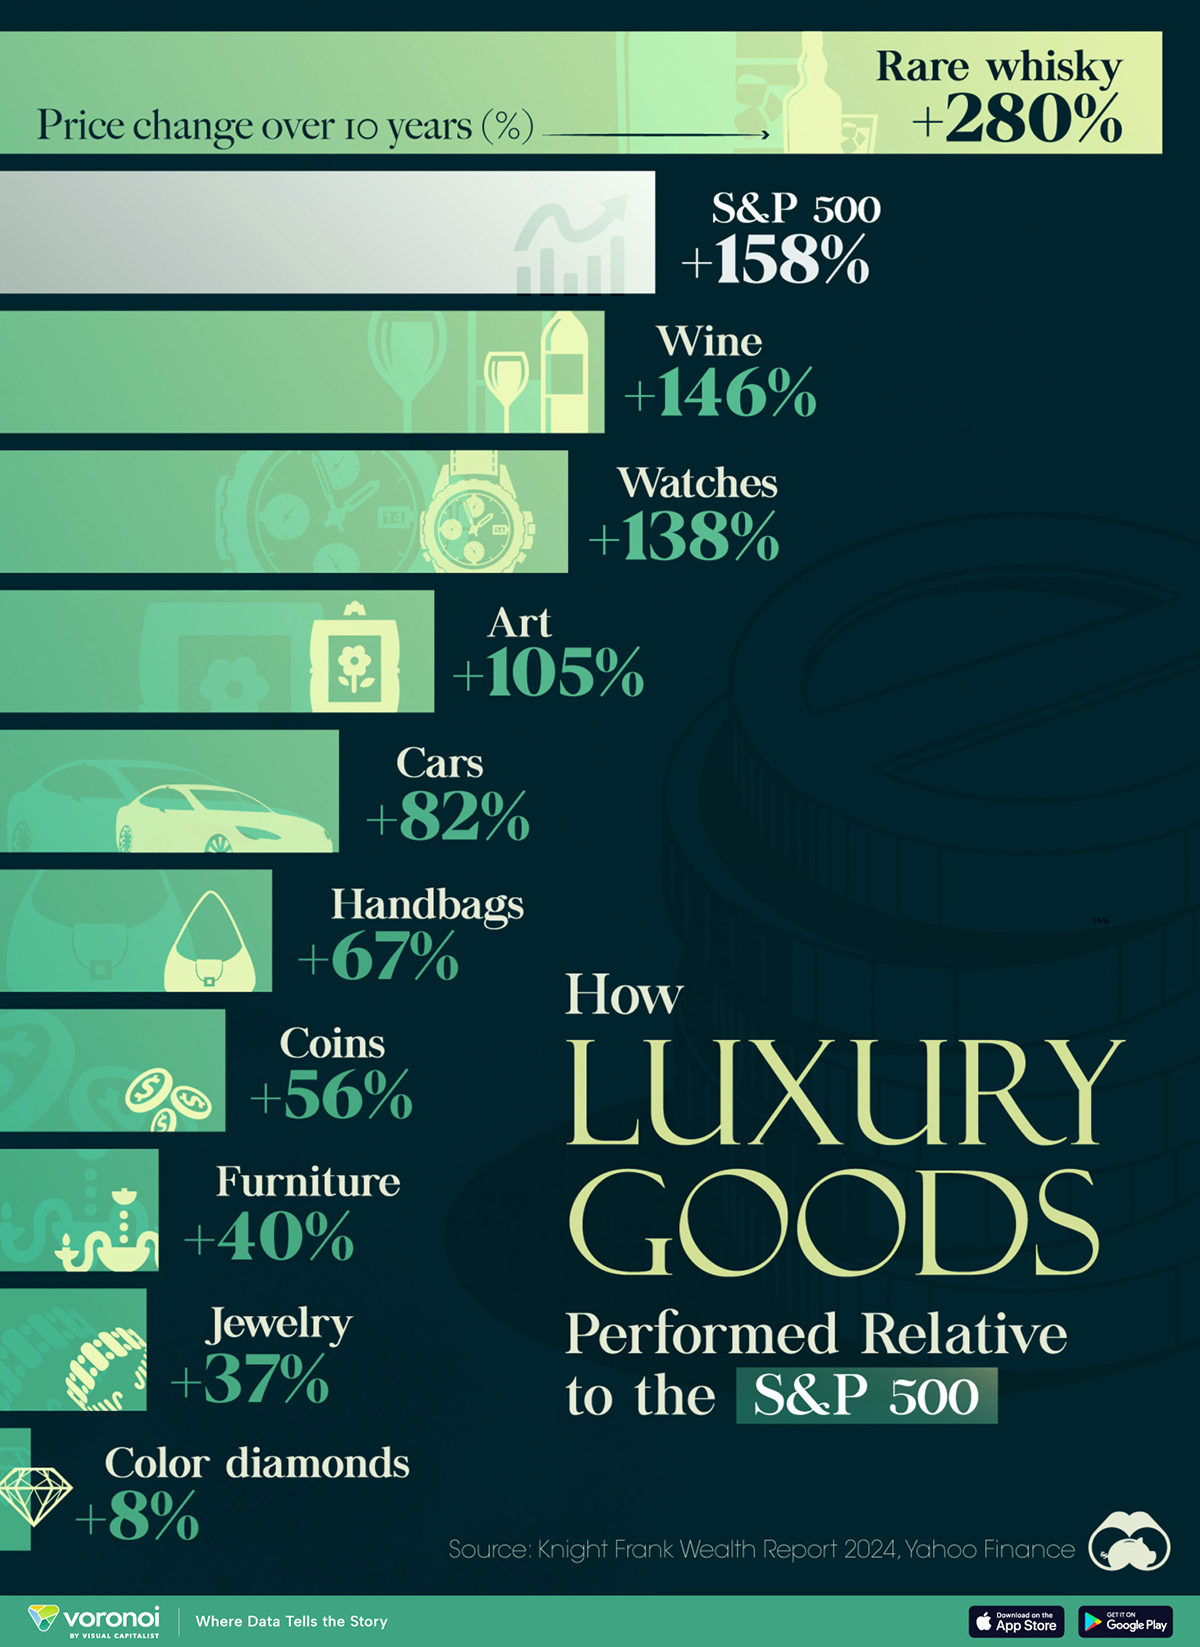 Chart of luxury goods by appreciation in value over 10 years